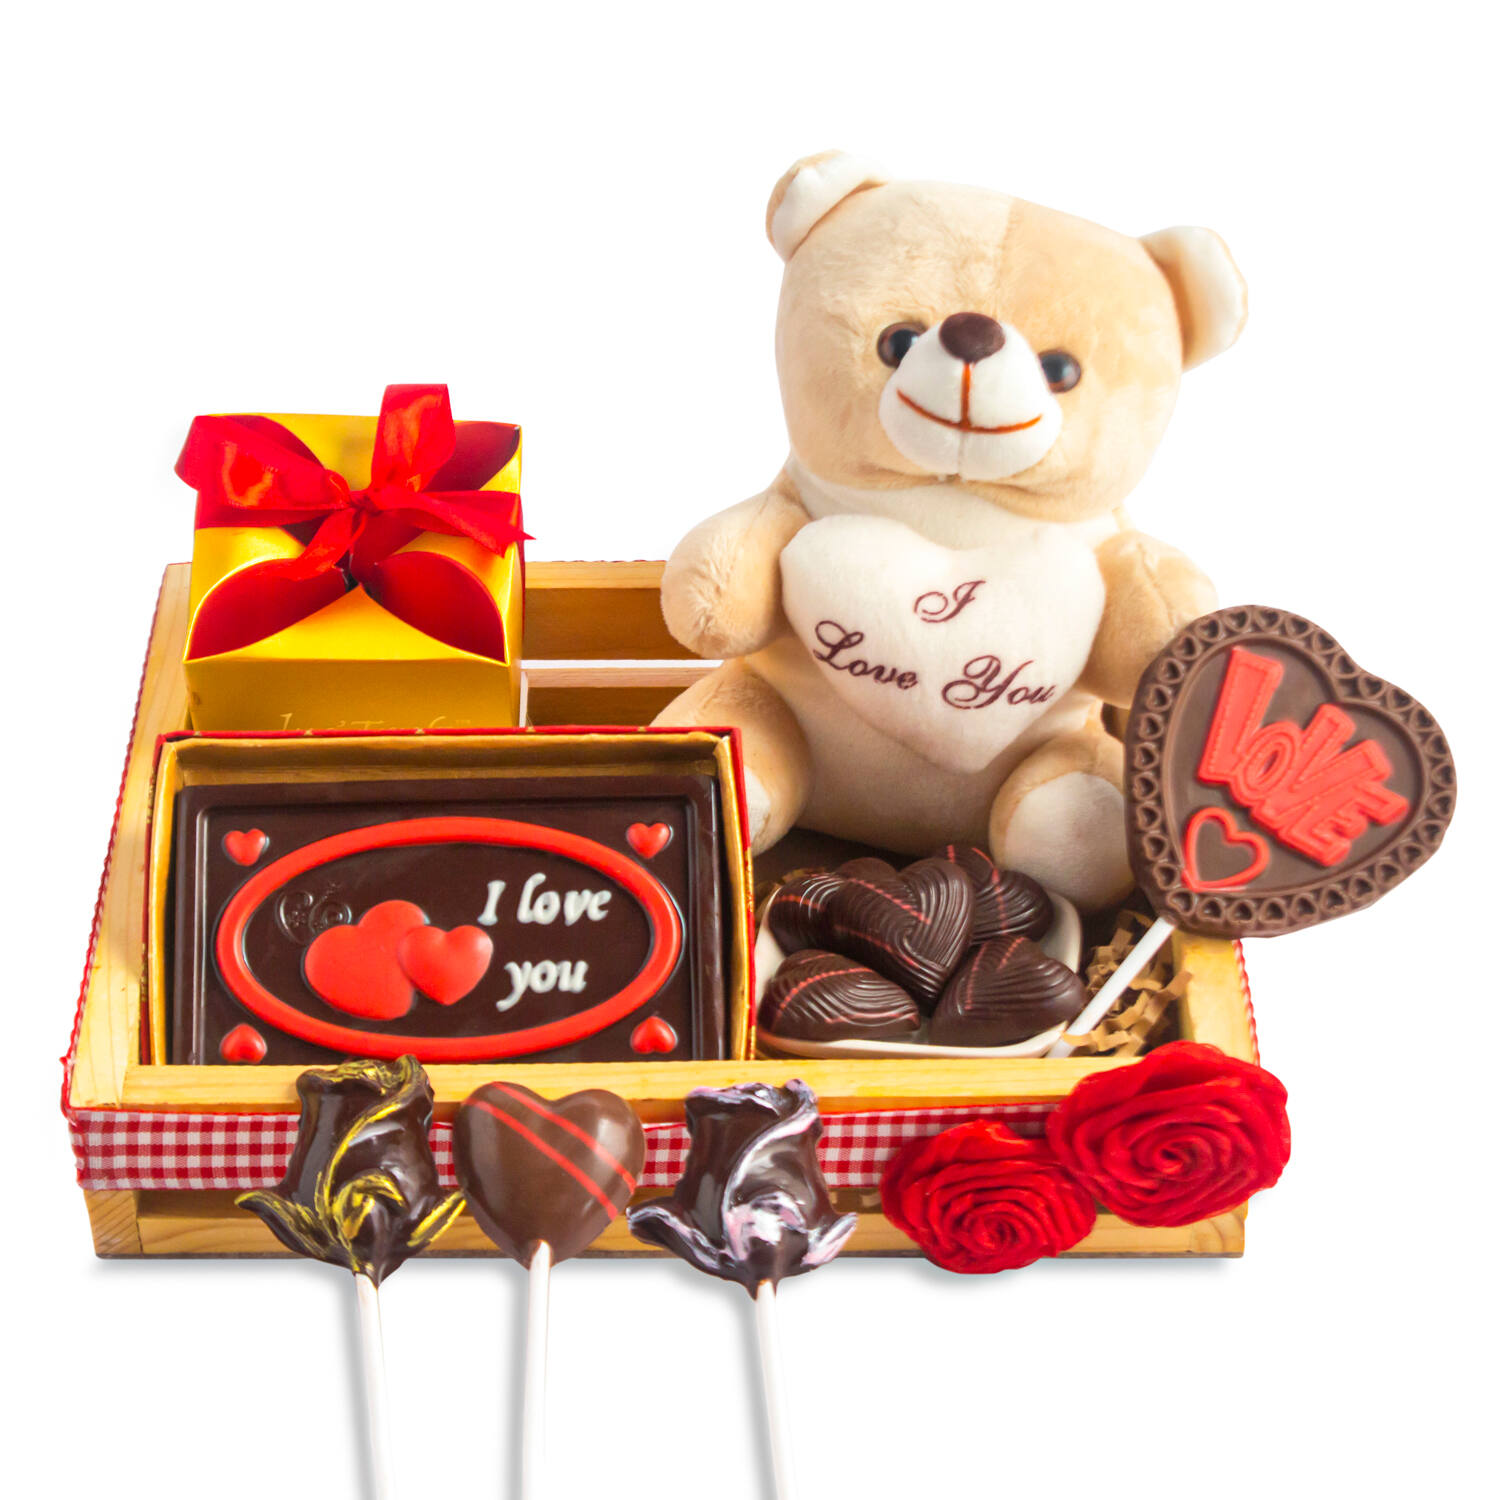 Adorable Teddy Valentine Gift Box with Rose Petals